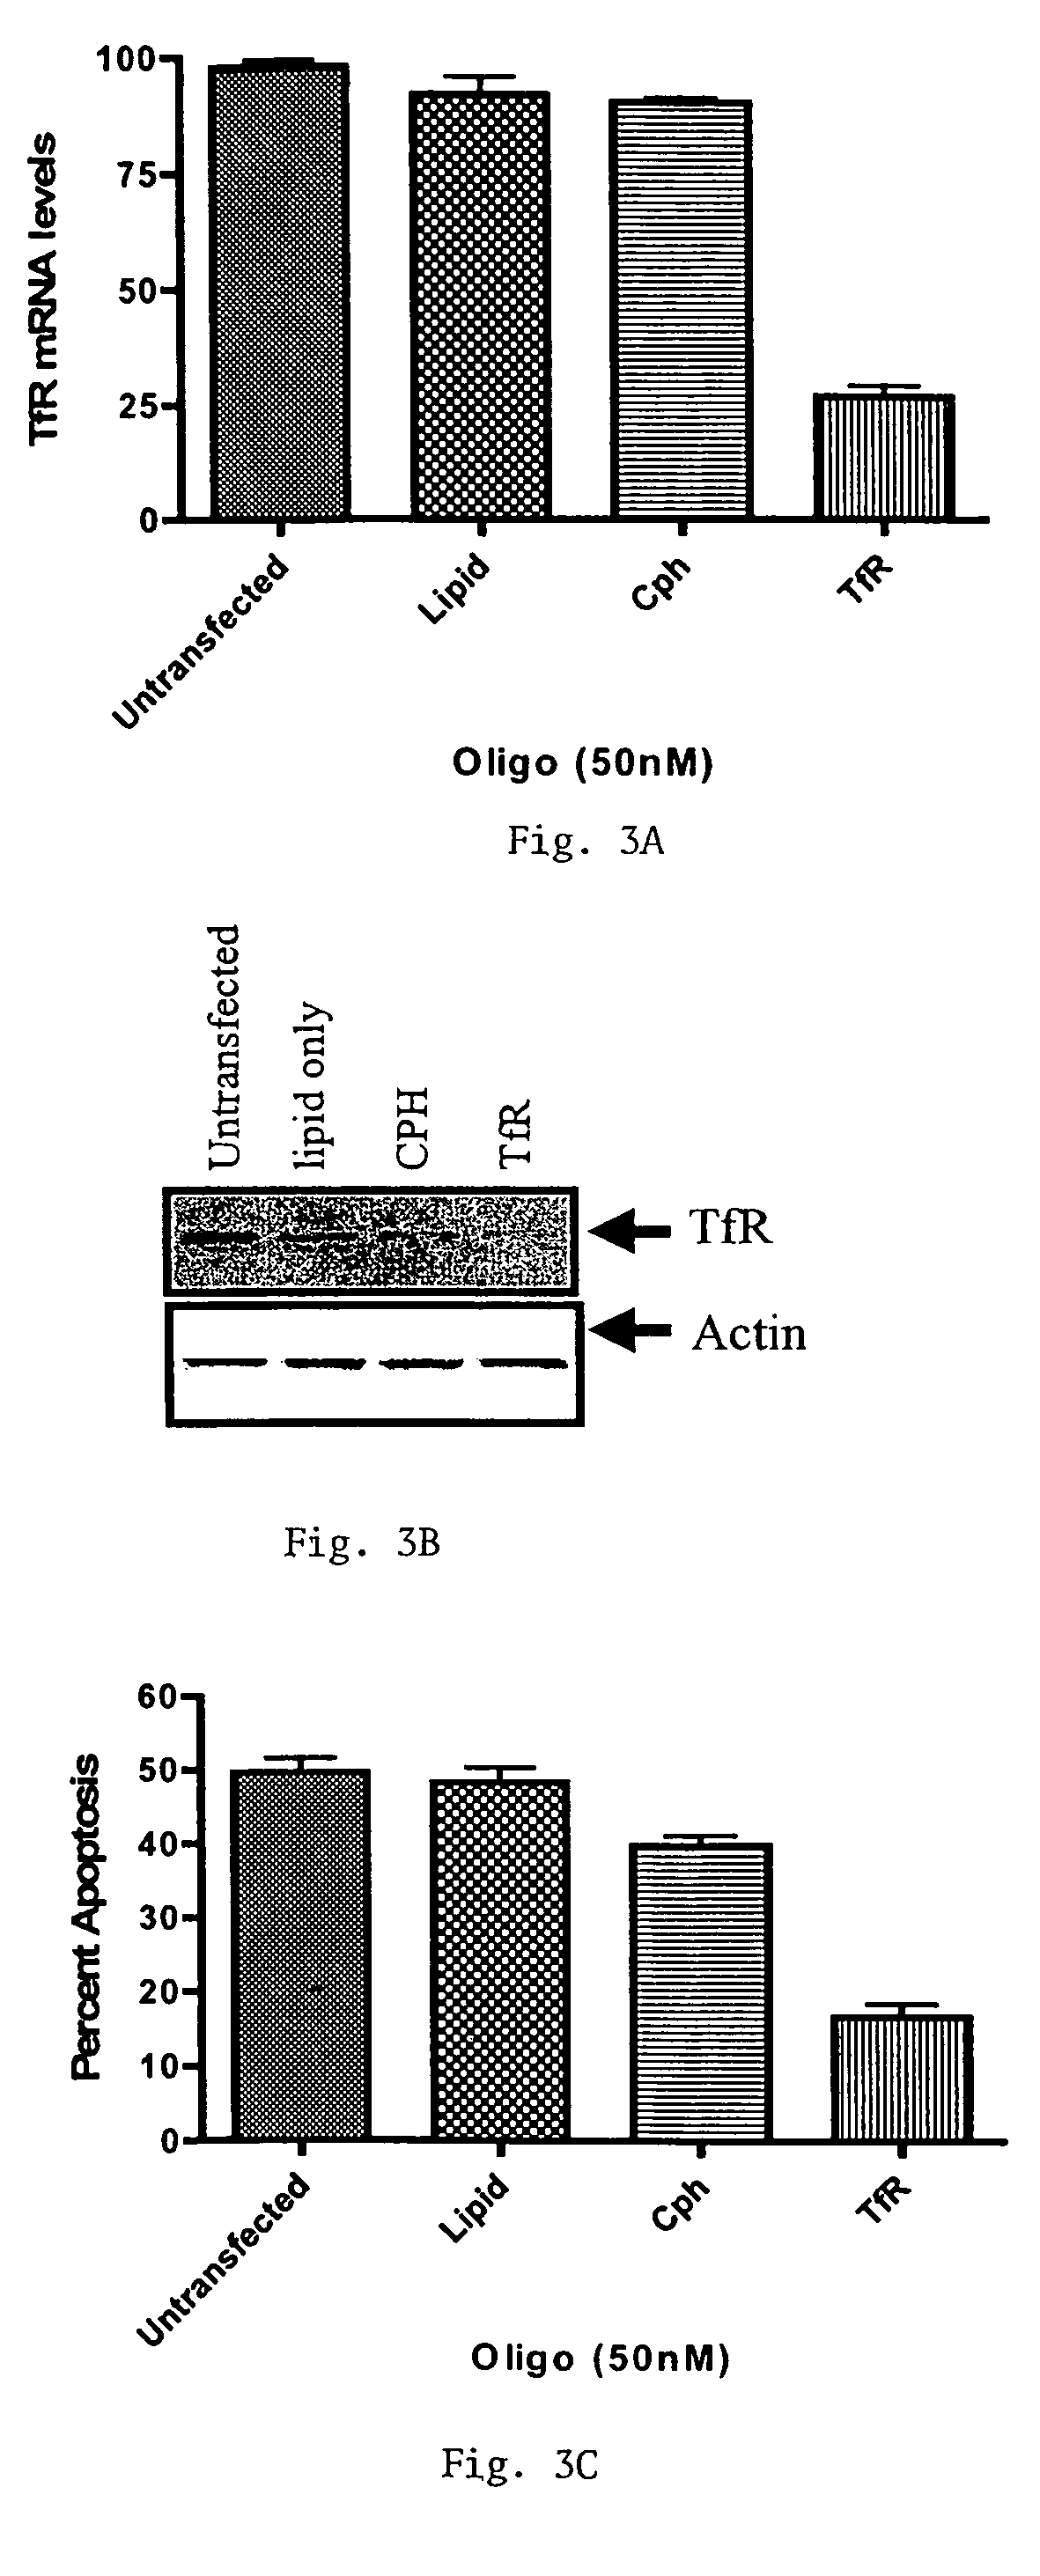 Methods of treating diseases responsive to induction of apoptosis and screening assays